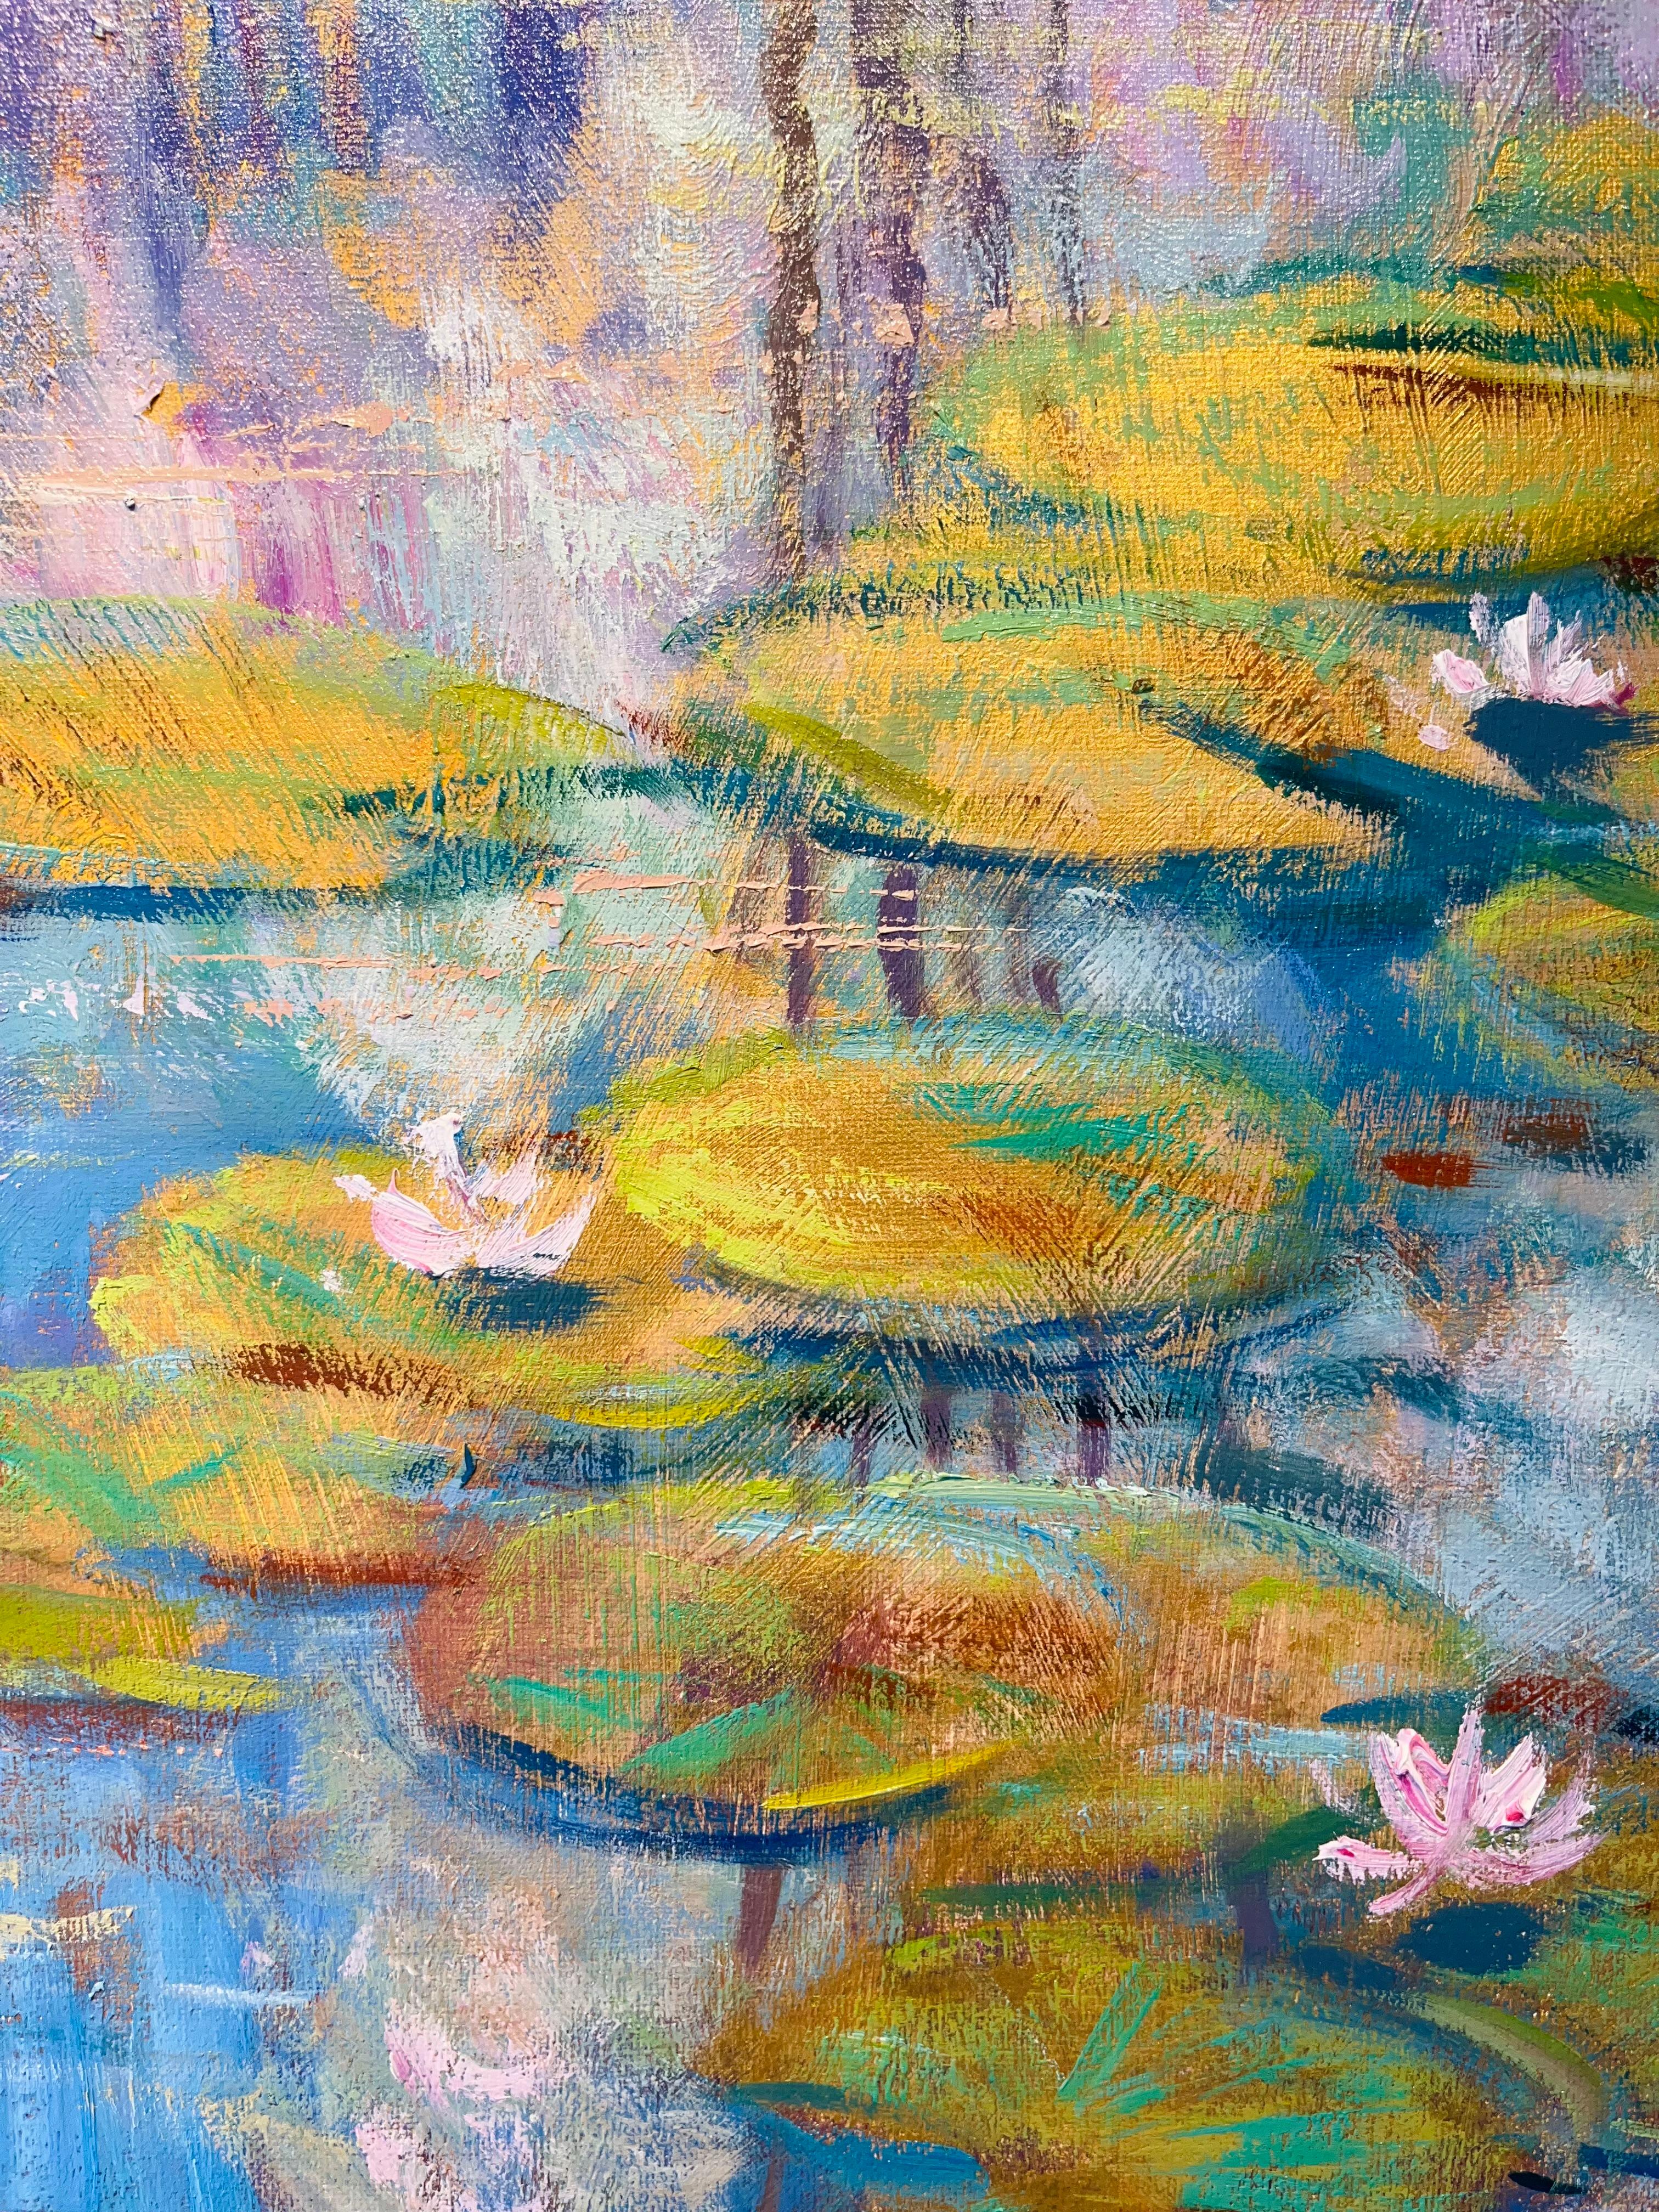 Sky Mirror-original impressionism waterlily landscape painting-contemporary art - Gray Landscape Painting by Juan del Pozo